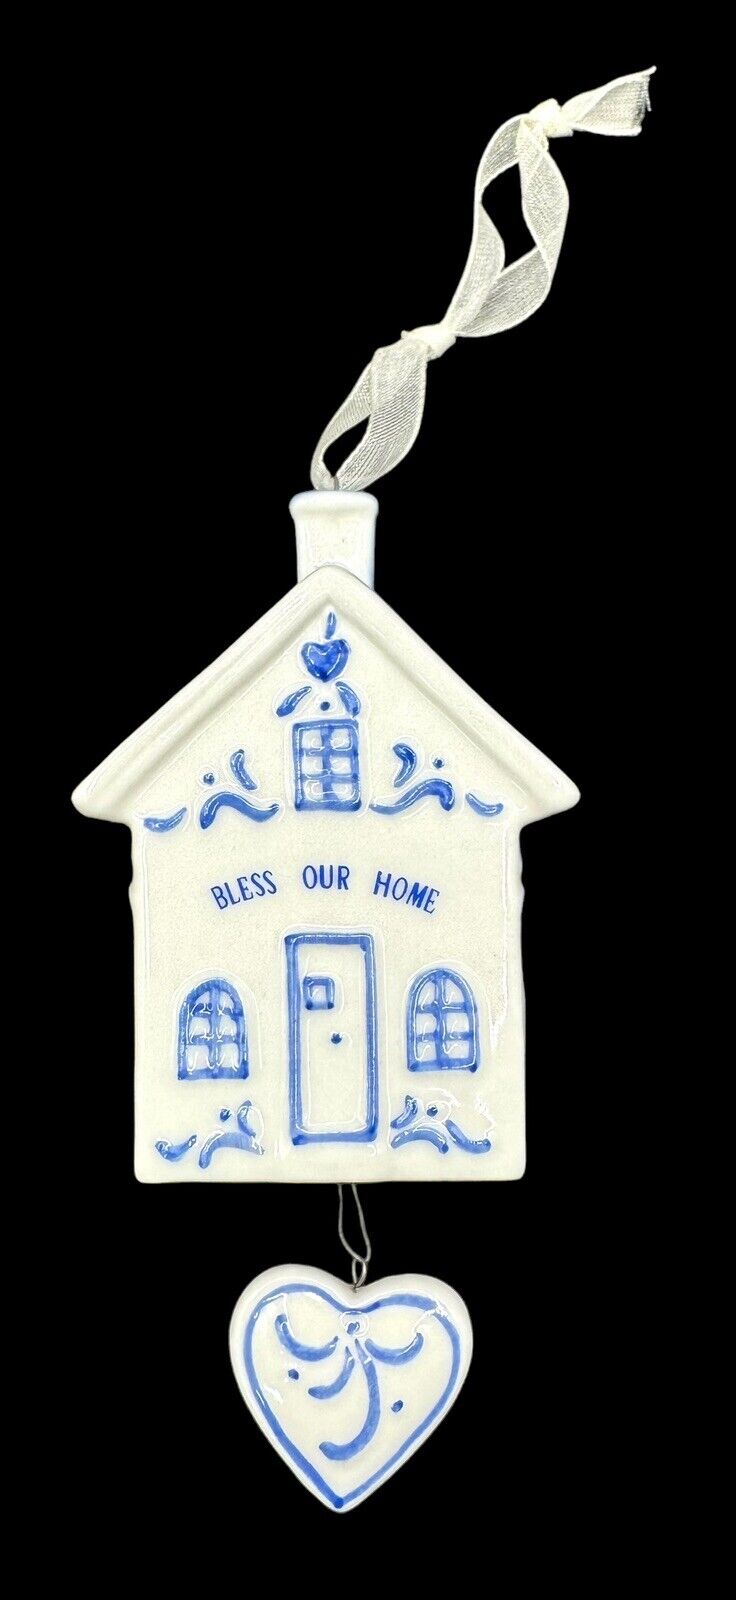 Ceramic Bless Our Home Hanging Ornament White Blue House Heart 3.25 inches